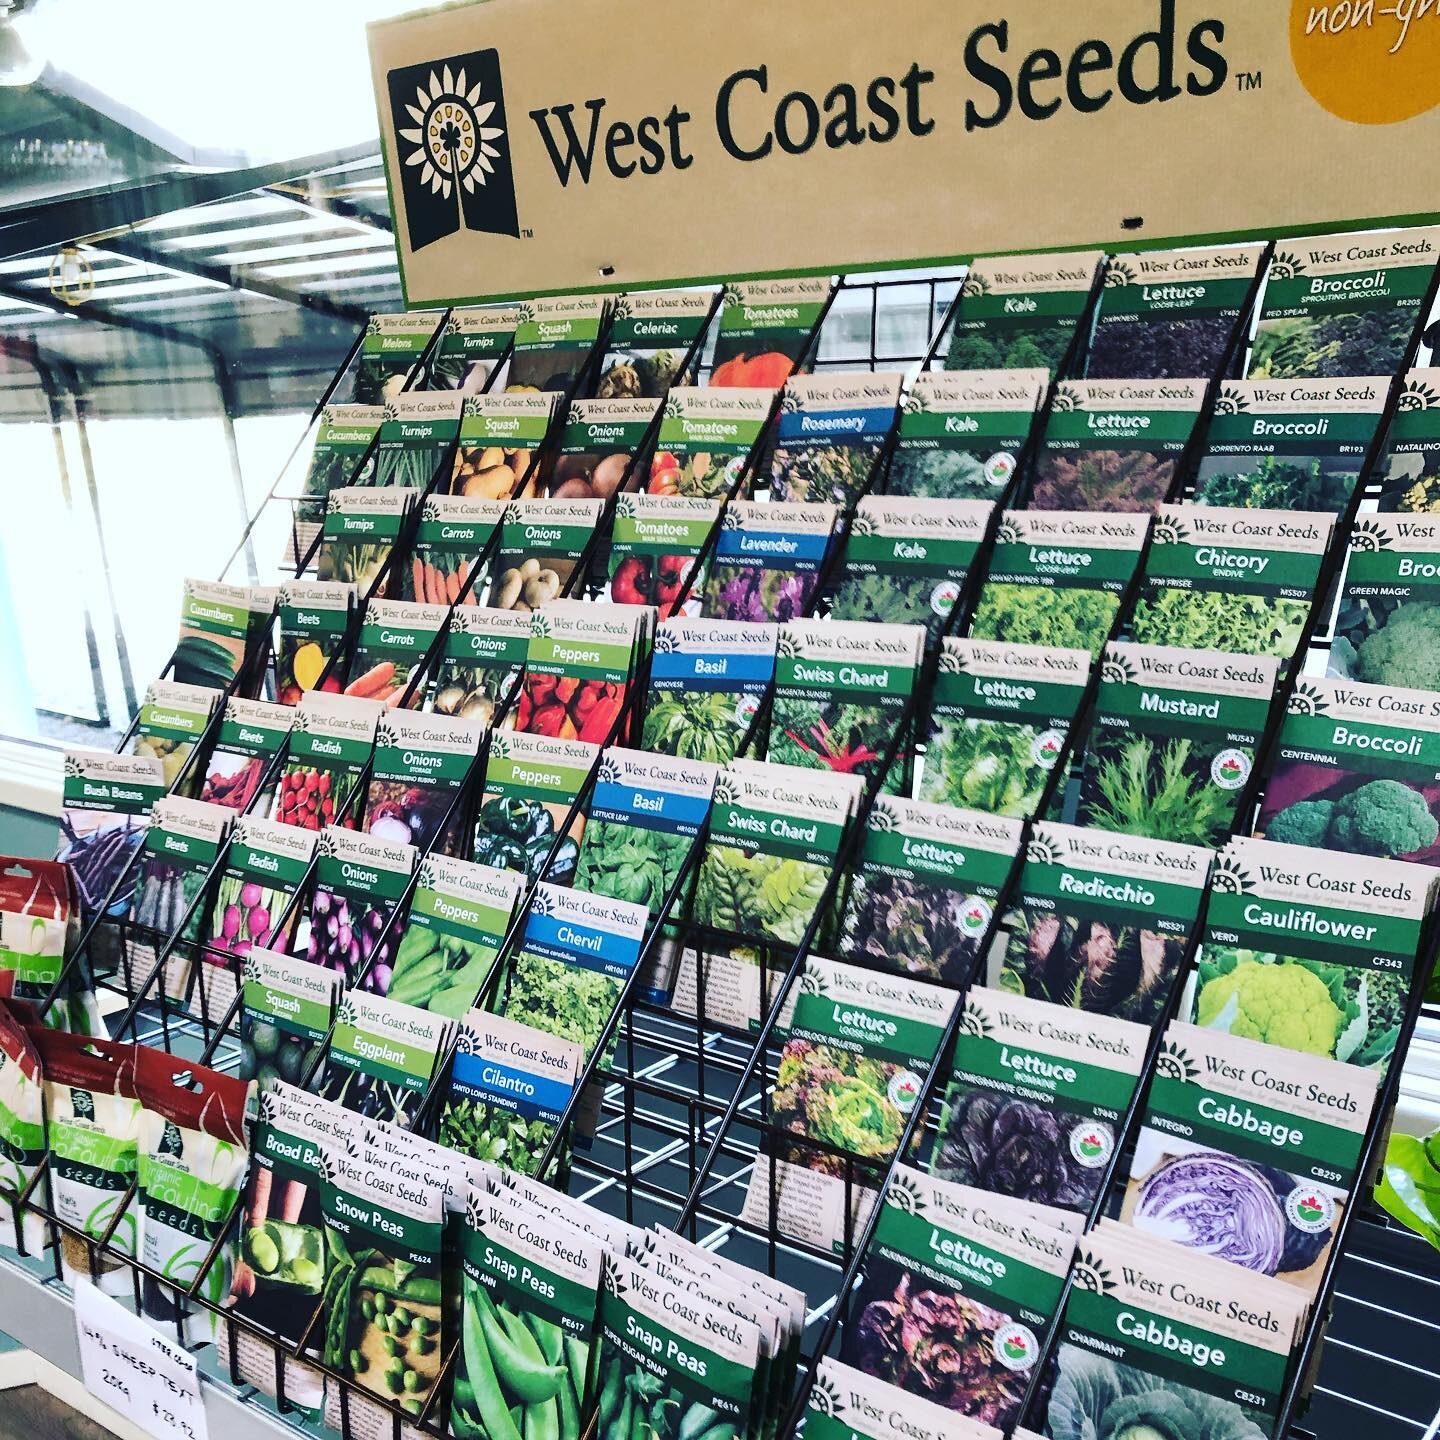 #seeds #garden #snacktime #teatime. We just got in another bunch of seeds from @saltspringseeds and @westcoastseeds  lots for you to plant in this sunny weather and some great treats to enjoy with your tea when you are done #happytuesday